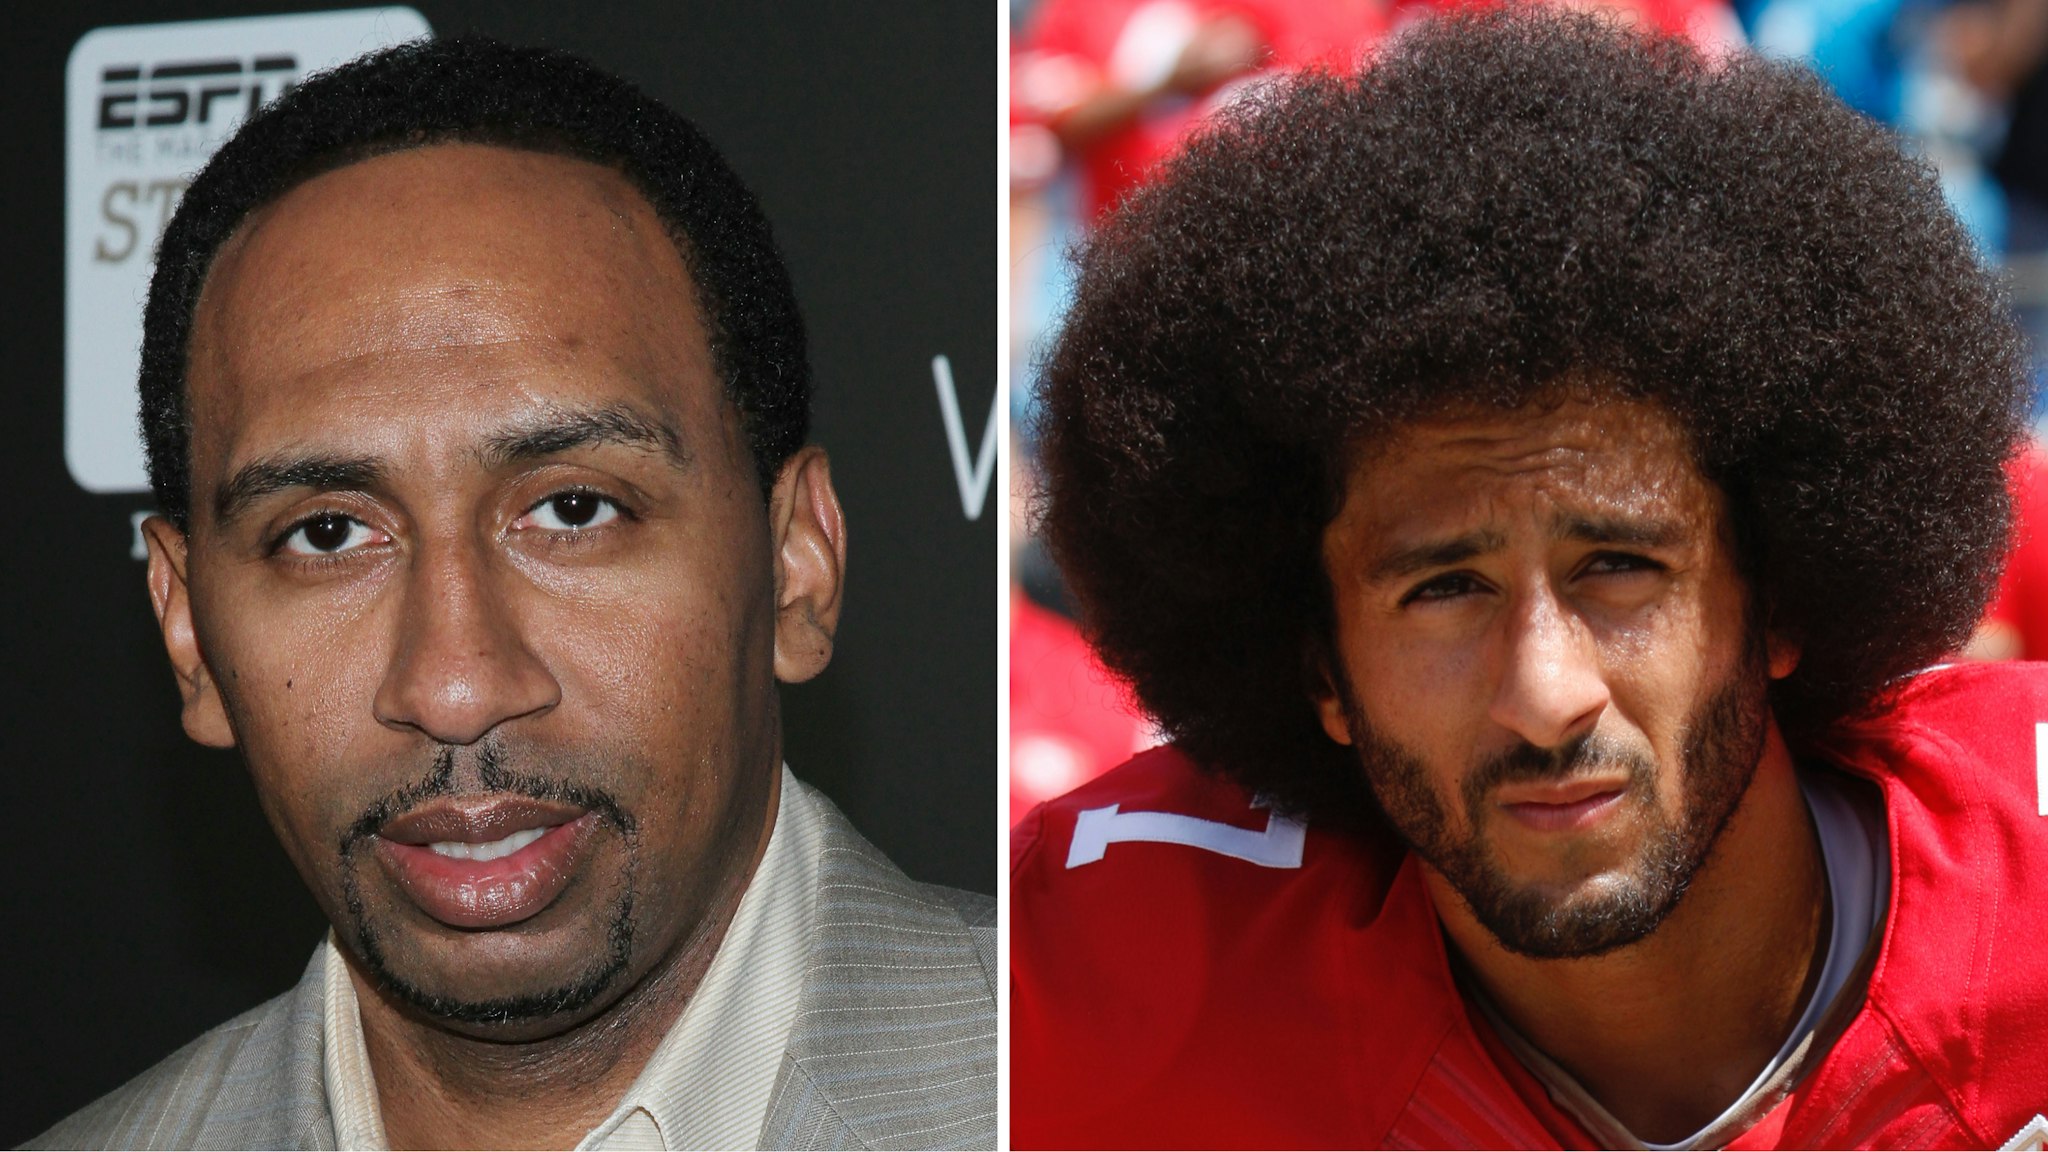 ESPN anchor Stephen A. Smith ... at Jazz at Lincoln Center on September 4, 2012 in New York City/Colin Kaepernick #7 of the San Francisco 49ers kneels ... on September 18, 2016 in Charlotte, North Carolina.